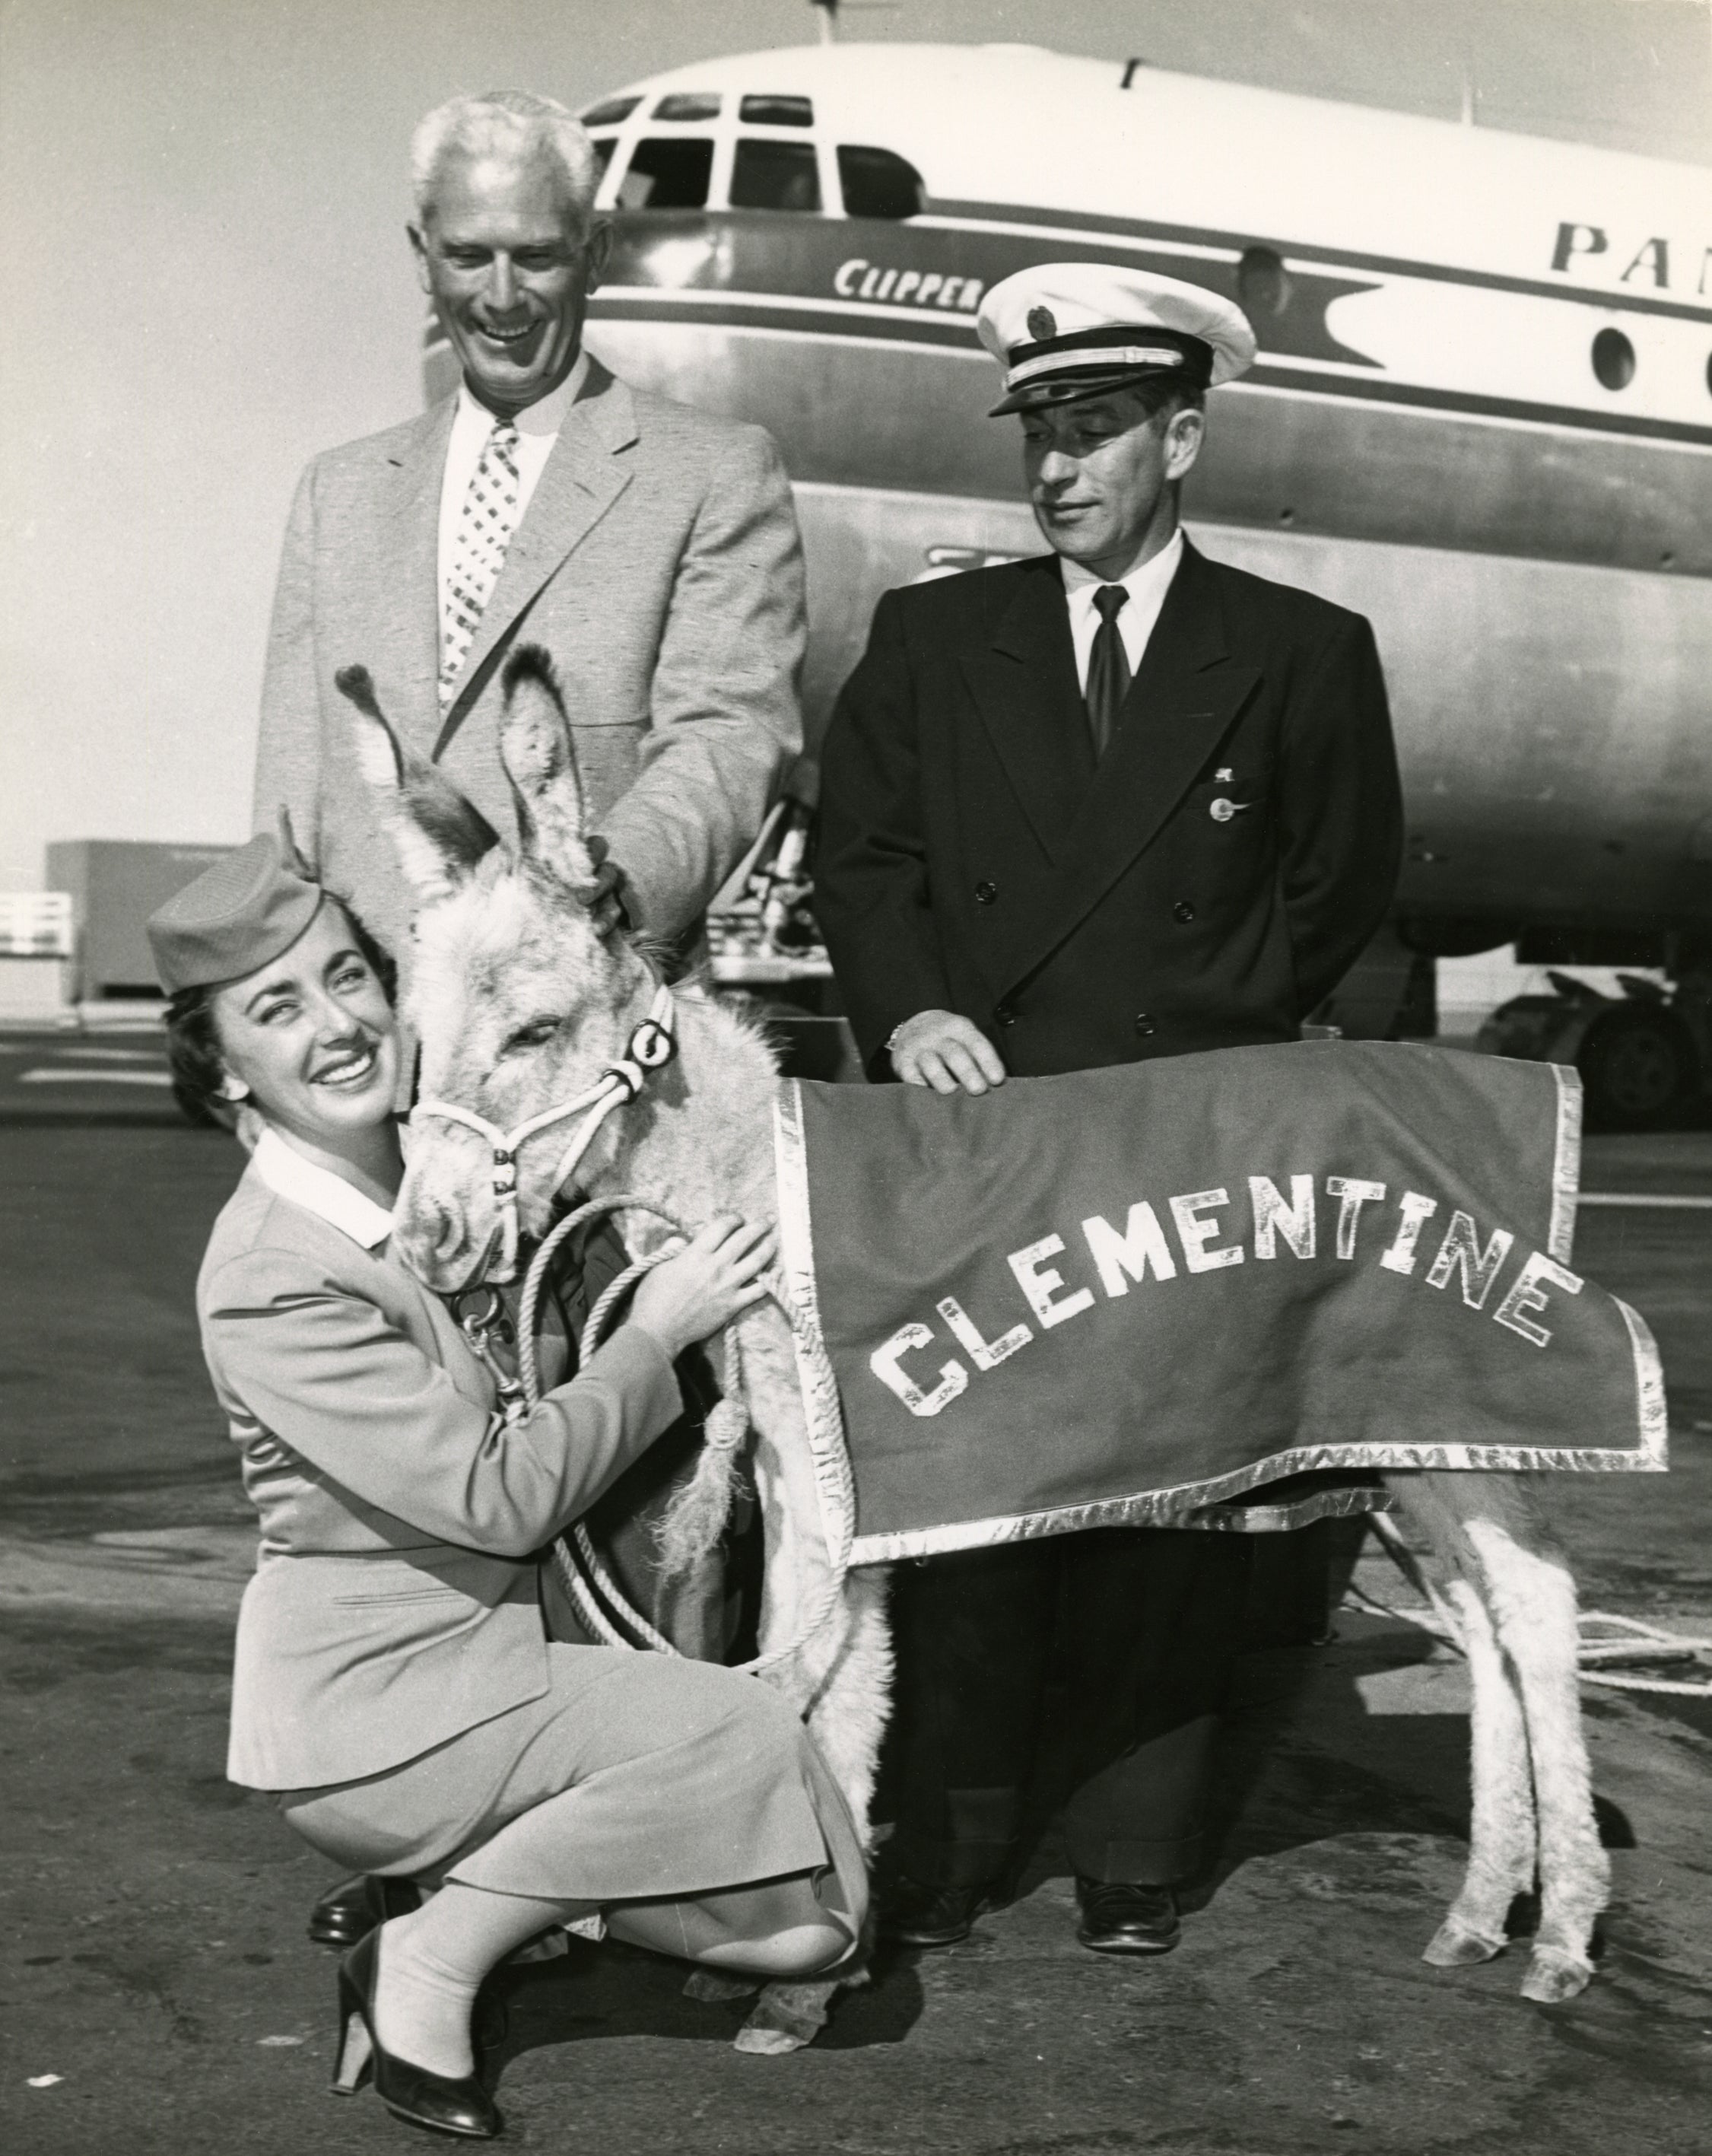 Clementine steps onto the airfield with Pan American World Airways stewardess Janece Johnson, captain Guy McCafferty, and San Francisco 49ers head coach Buck Shaw in front of Boeing 377 Stratocruiser N1023V Clipper Golden Gate, San Francisco International Airport (SFO)  September 1954